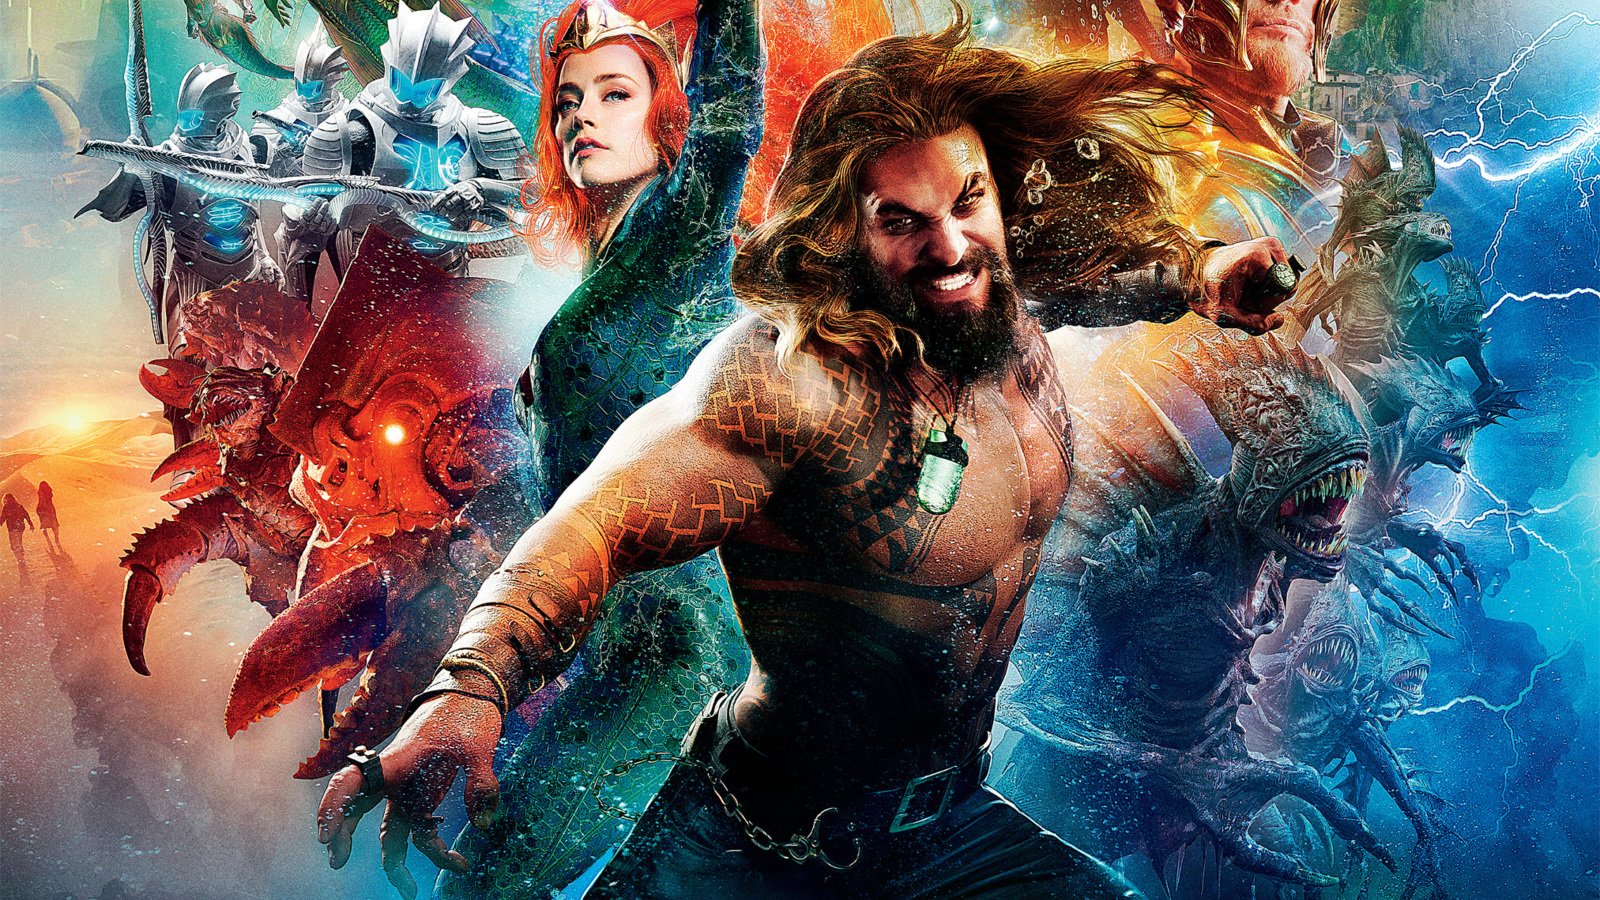 Aquaman 2 The superhero movie is coming back with its sequel! Read to